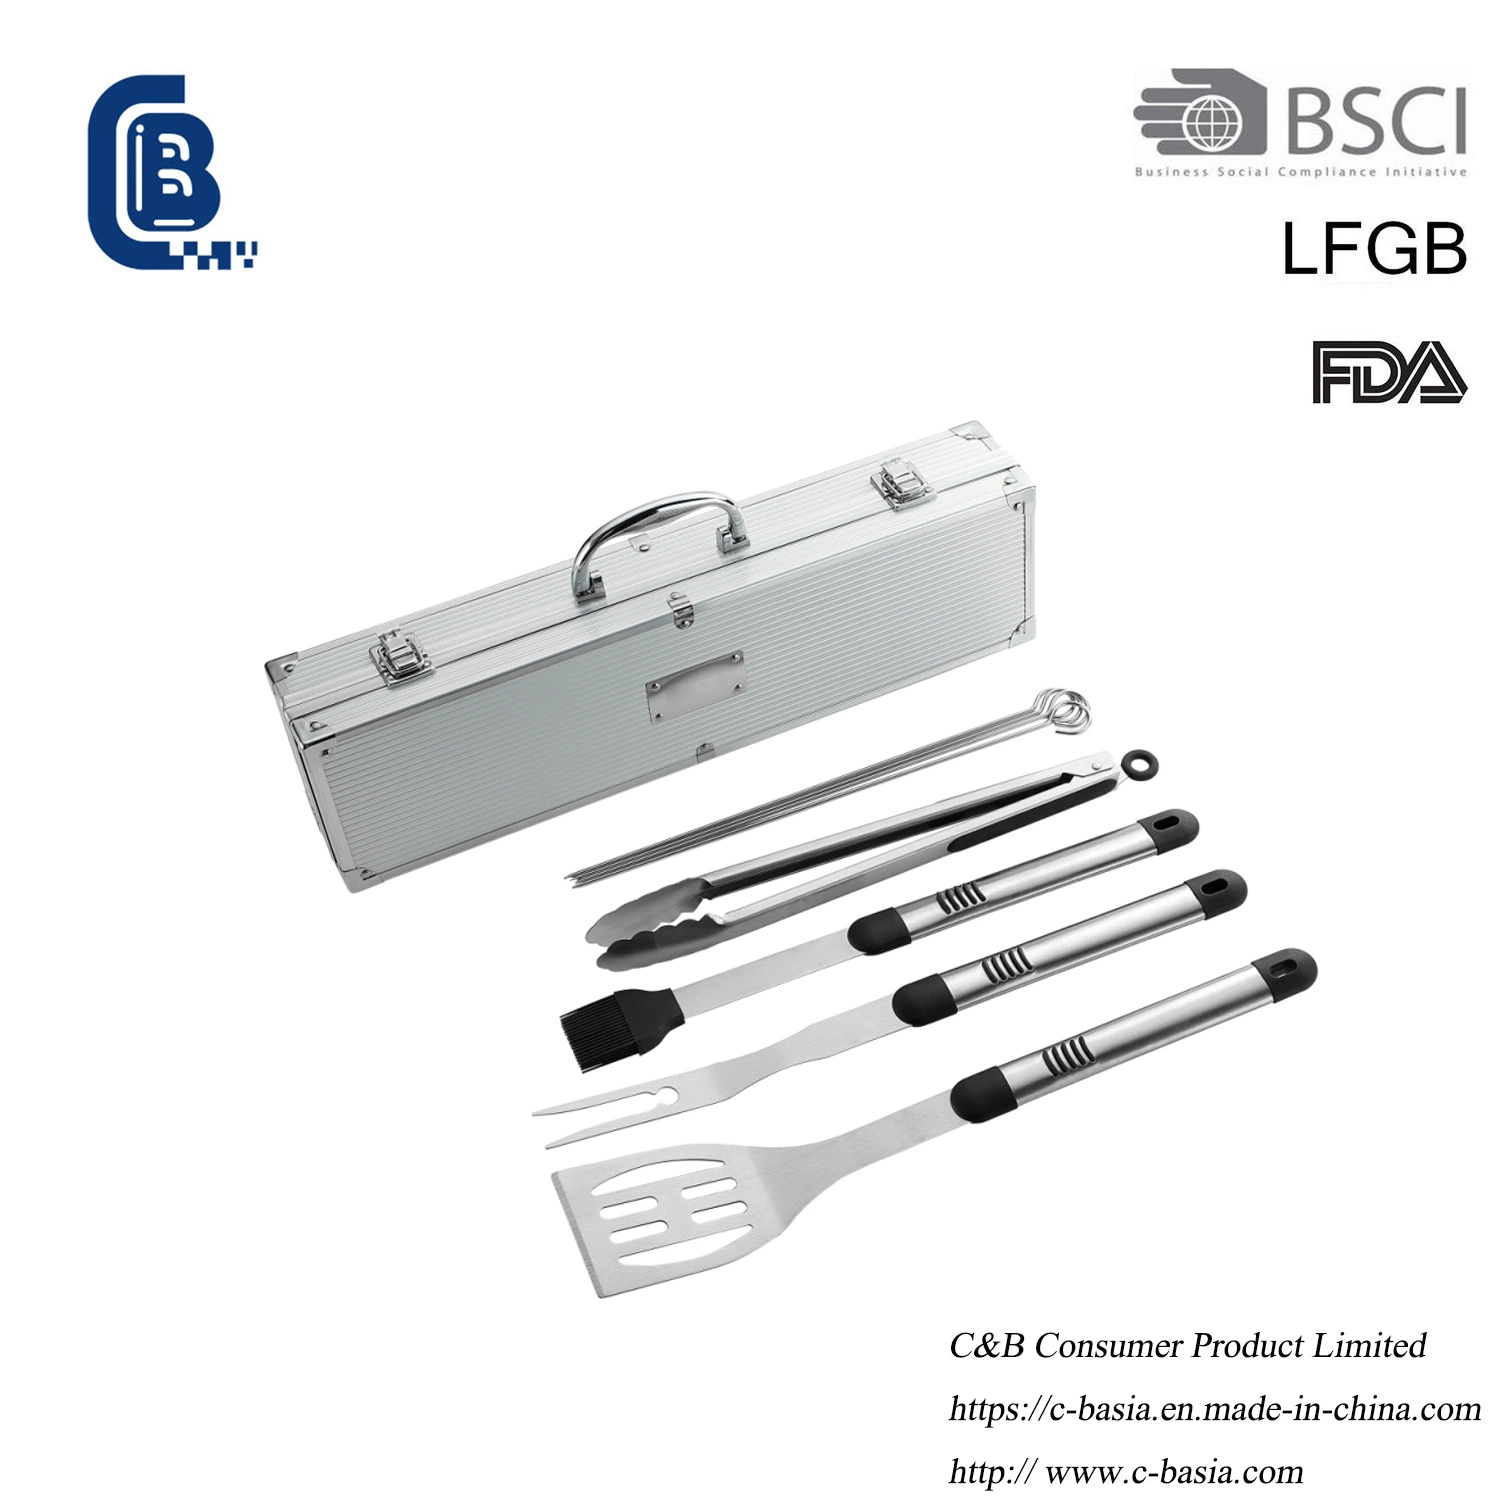 9PCS Stainless Steel BBQ Grilling Tools Set with Carry Box, Cooking Tools Barbecue Grill Set BBQ Tool 6